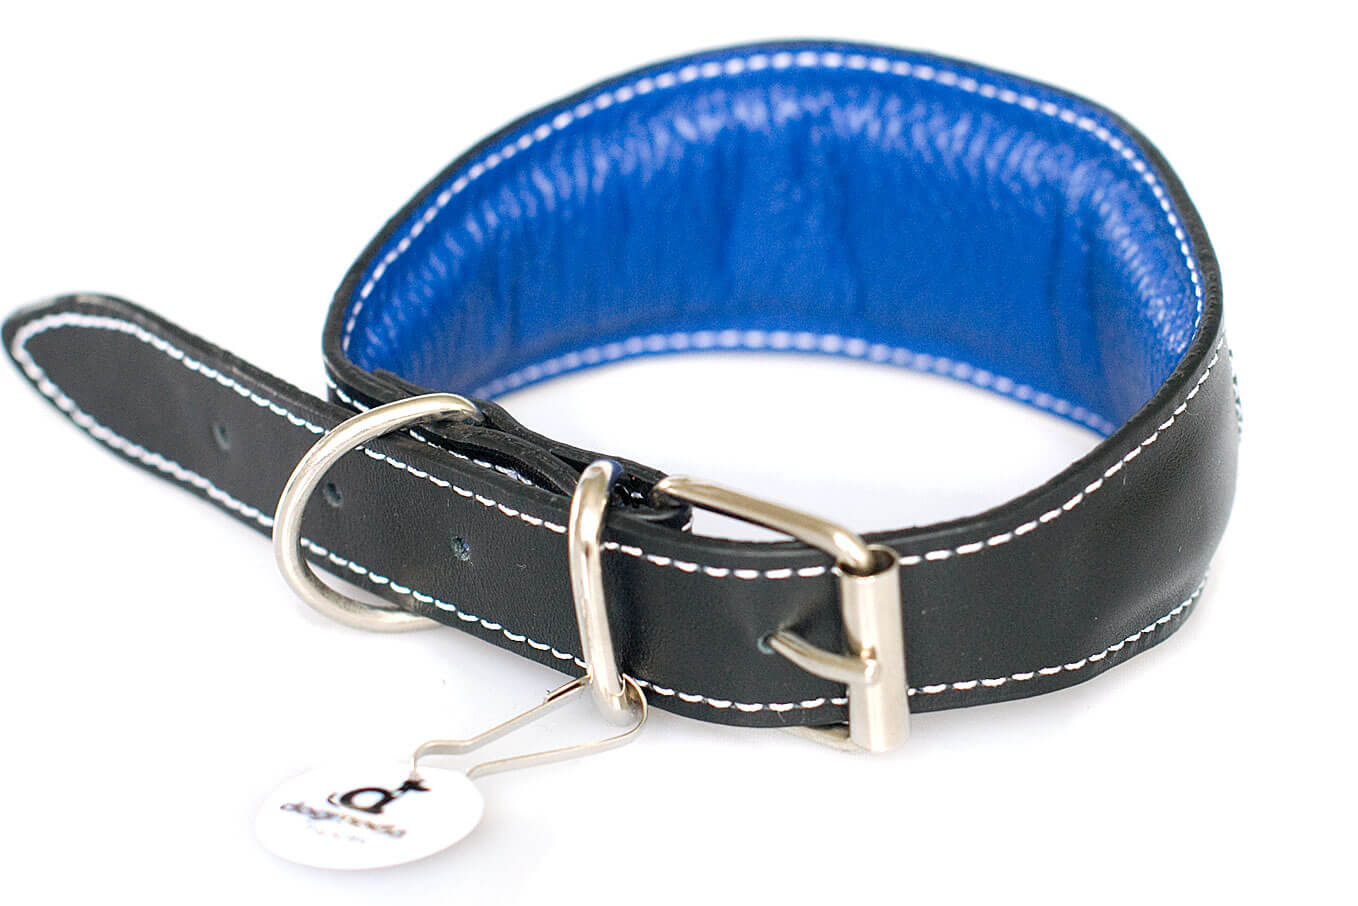 Blue hearts collar is available in 5 sizes